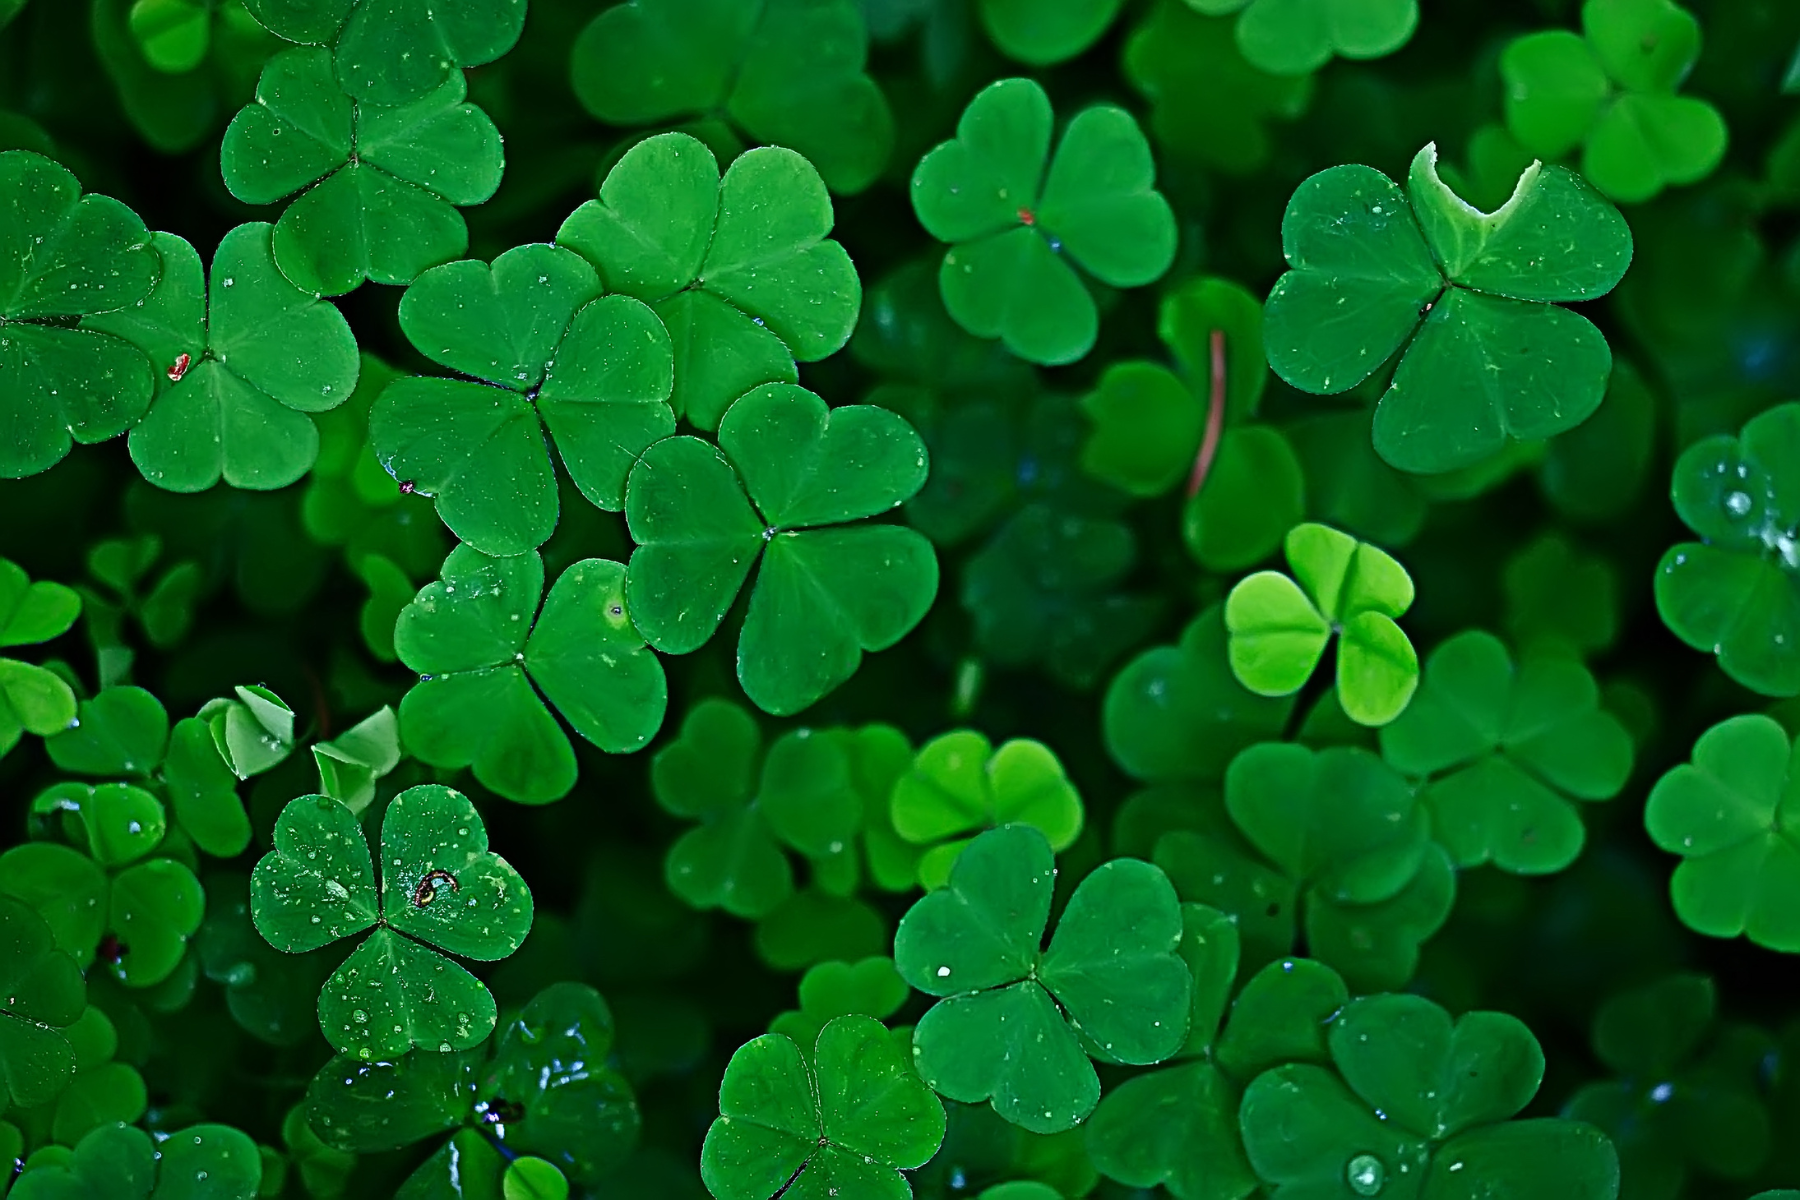 That four-leaf clover you found may not be a four-leaf clover